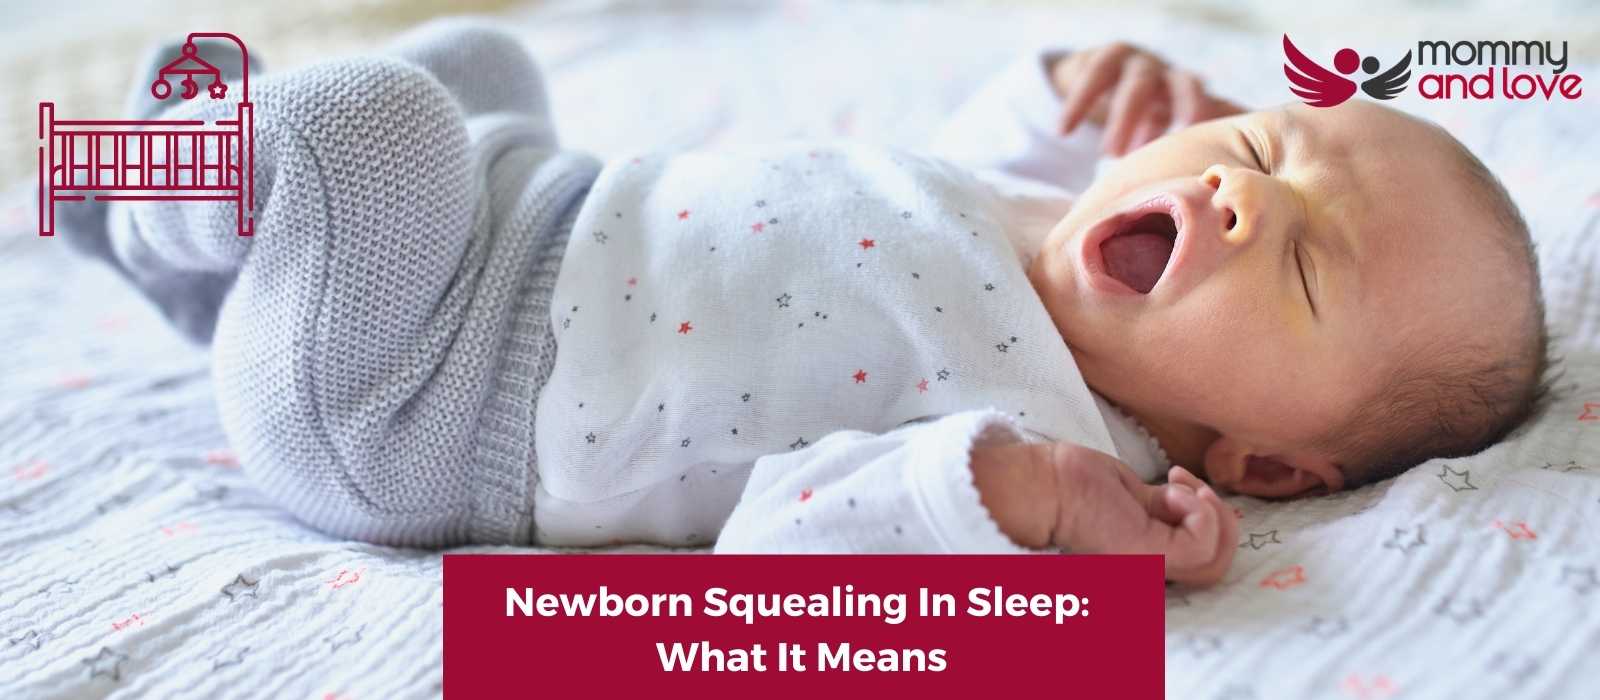 Newborn Squealing In Sleep: What It Means